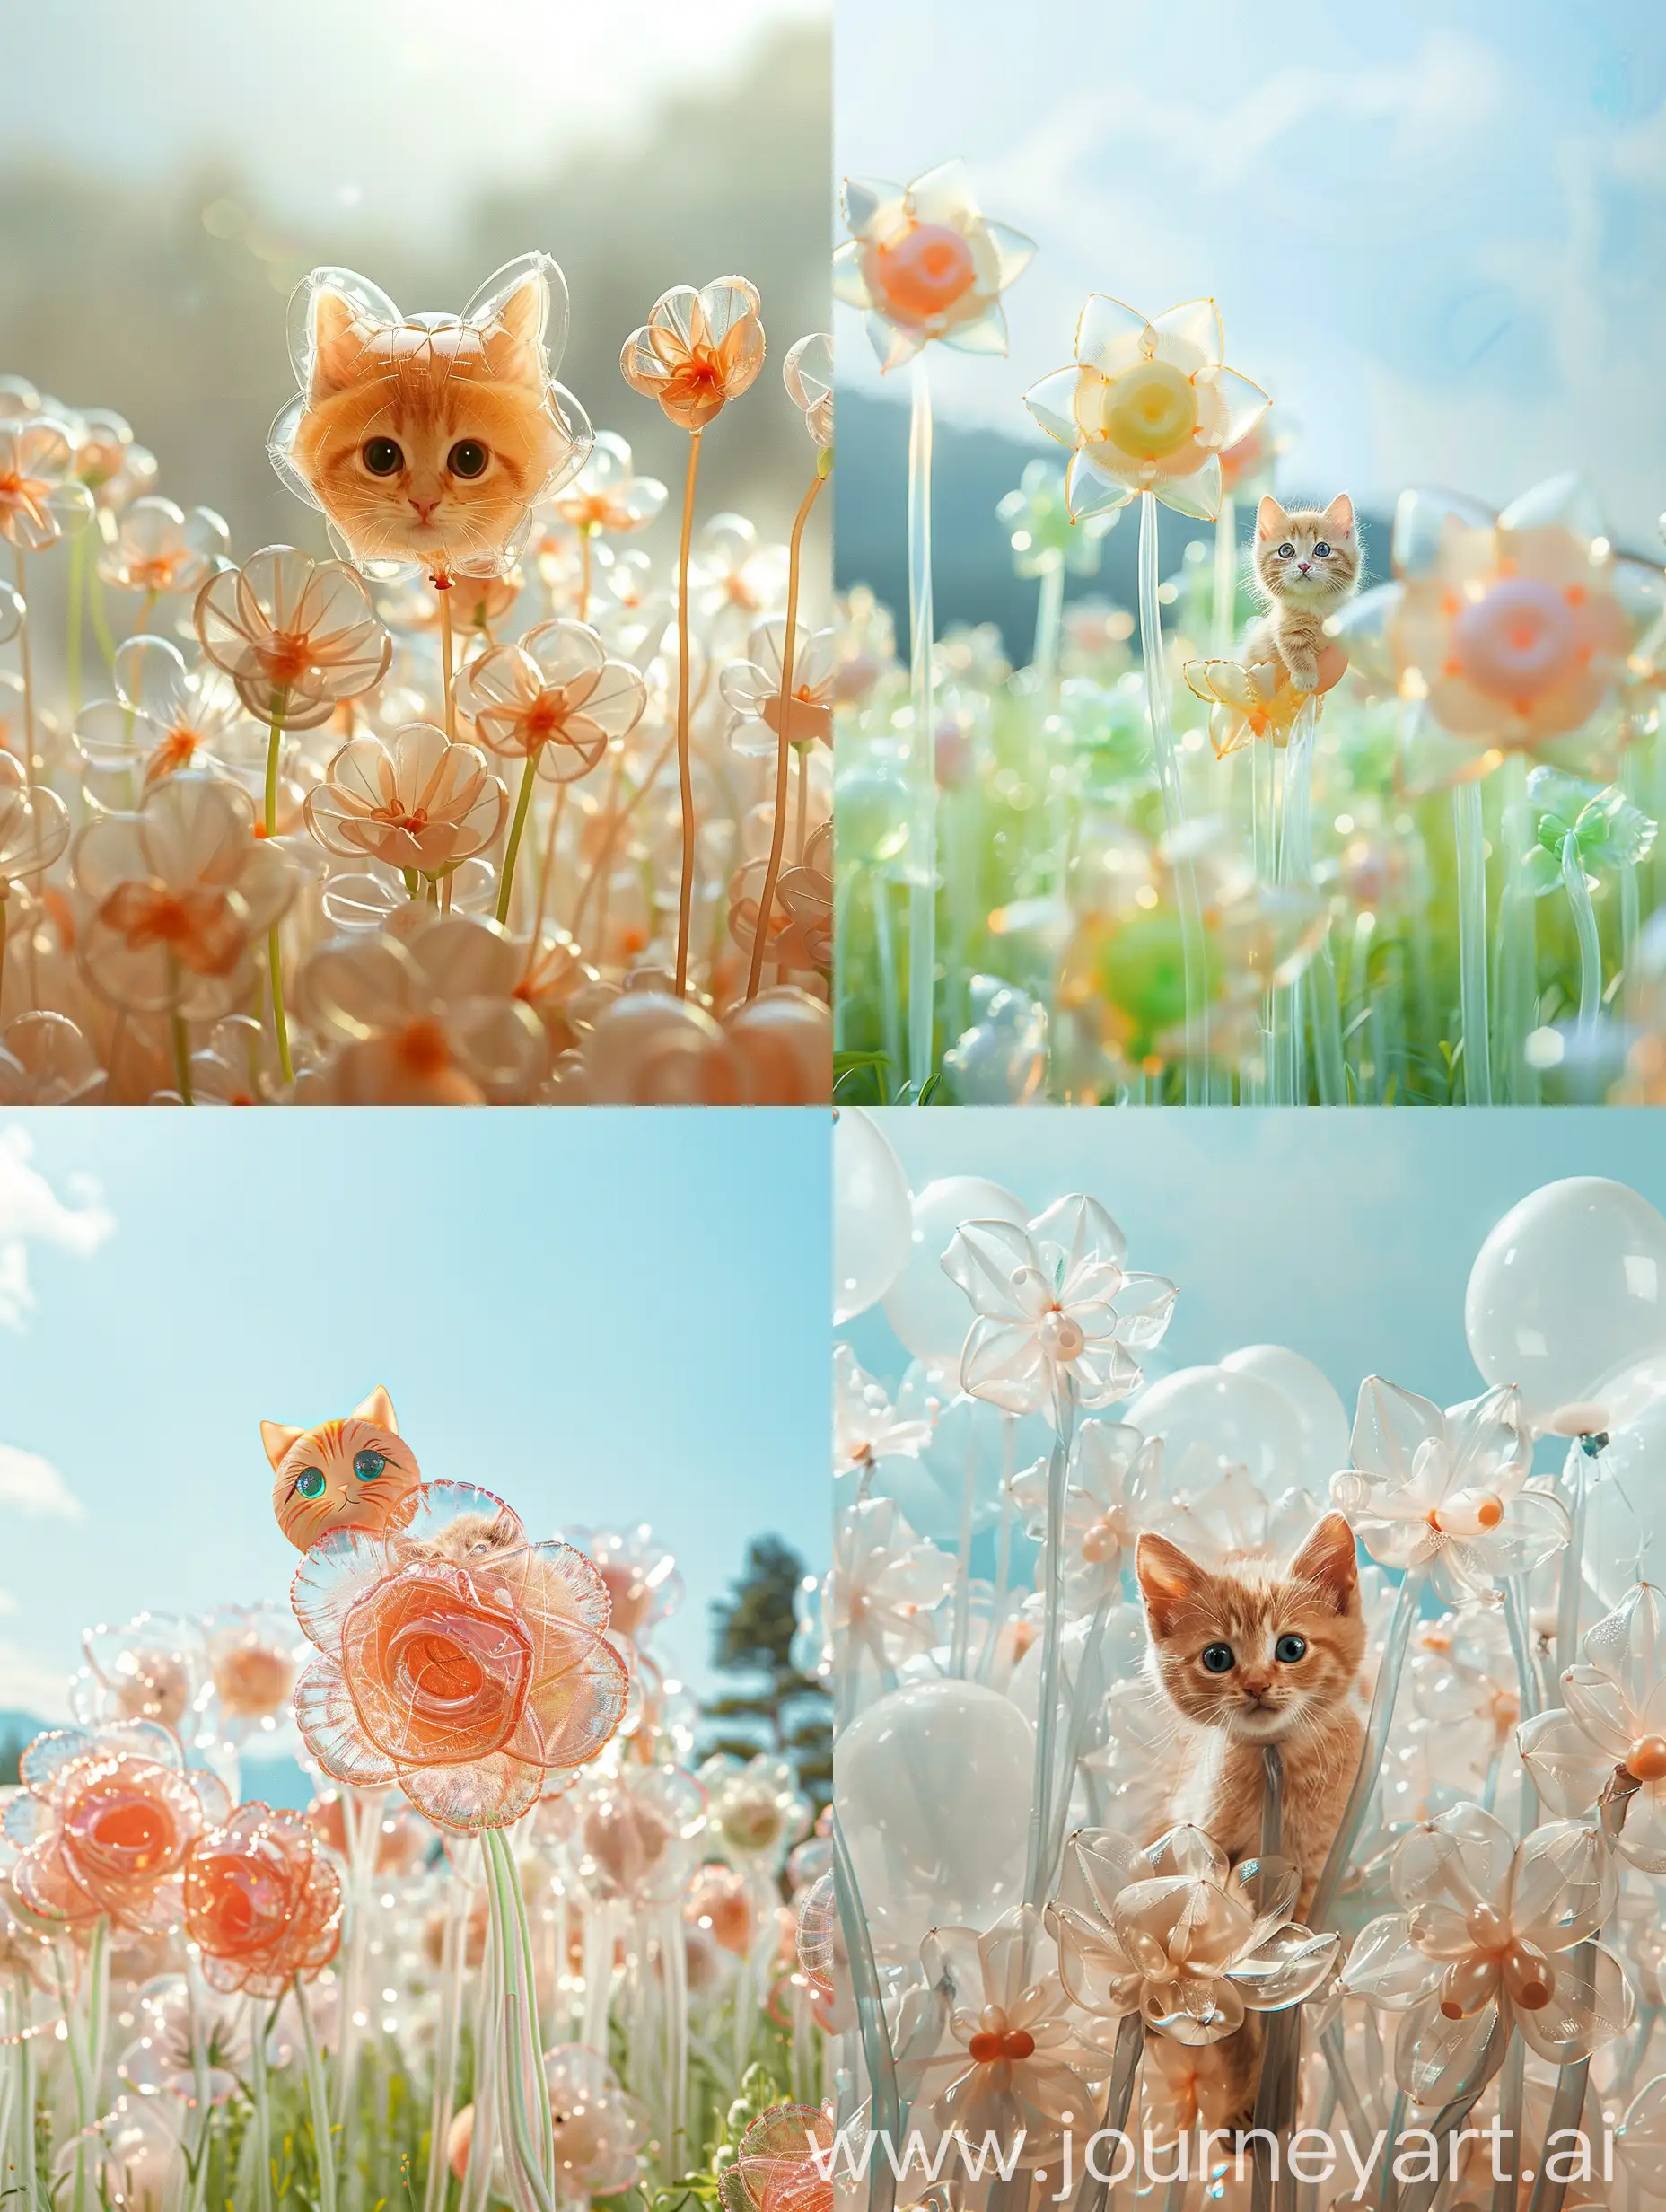 Flowers in a field made from clear light-colored balloons，The head of the flower is a kitten's head